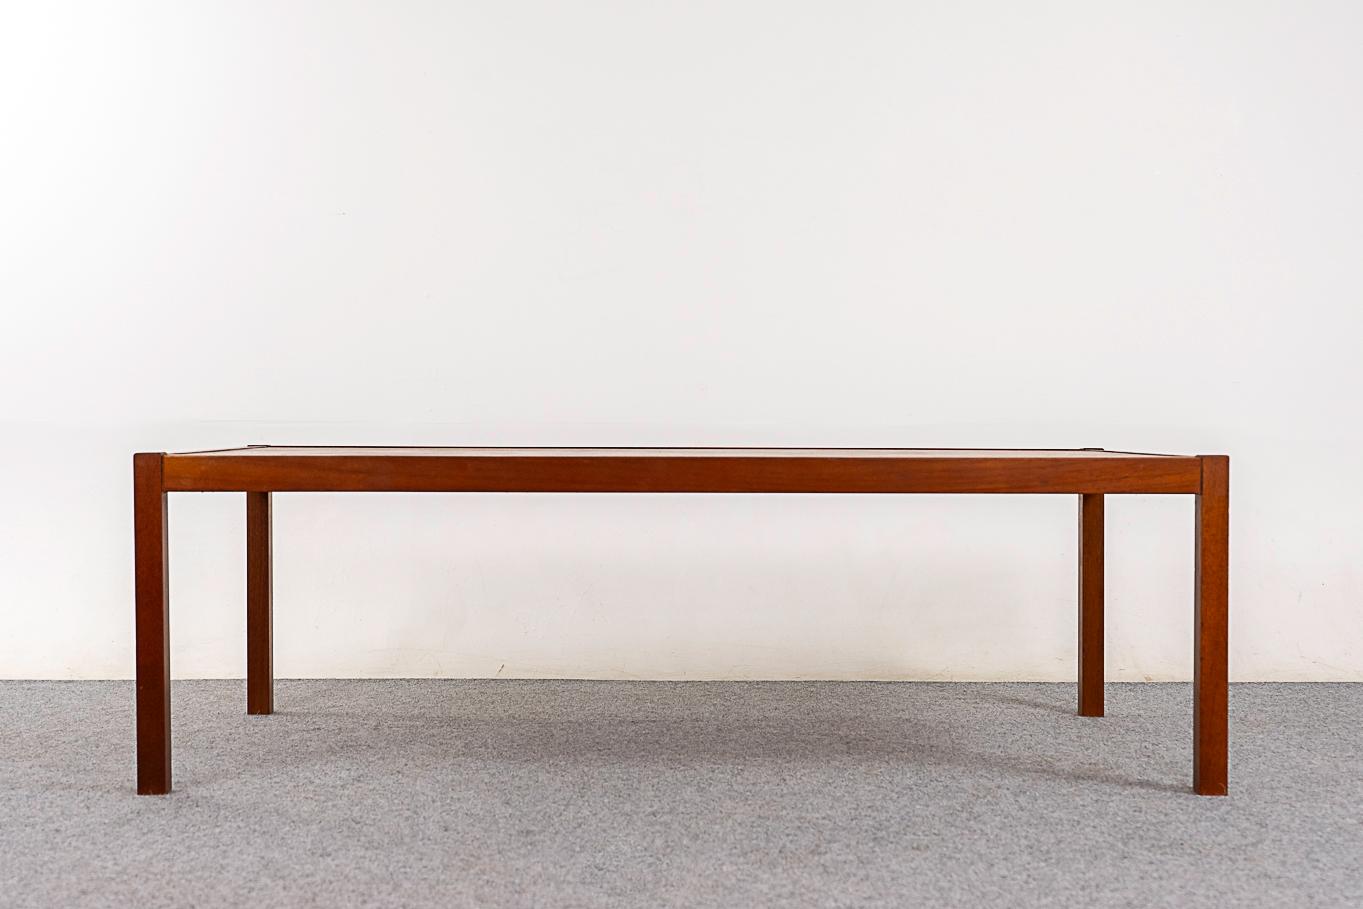 Teak mid-century coffee table, circa 1970's. Low table with slim legs and generous proportions. Games night is on! 

Unrestored item with option to purchase in restored condition for an additional $100 USD. Restoration includes: repairs, sanding,